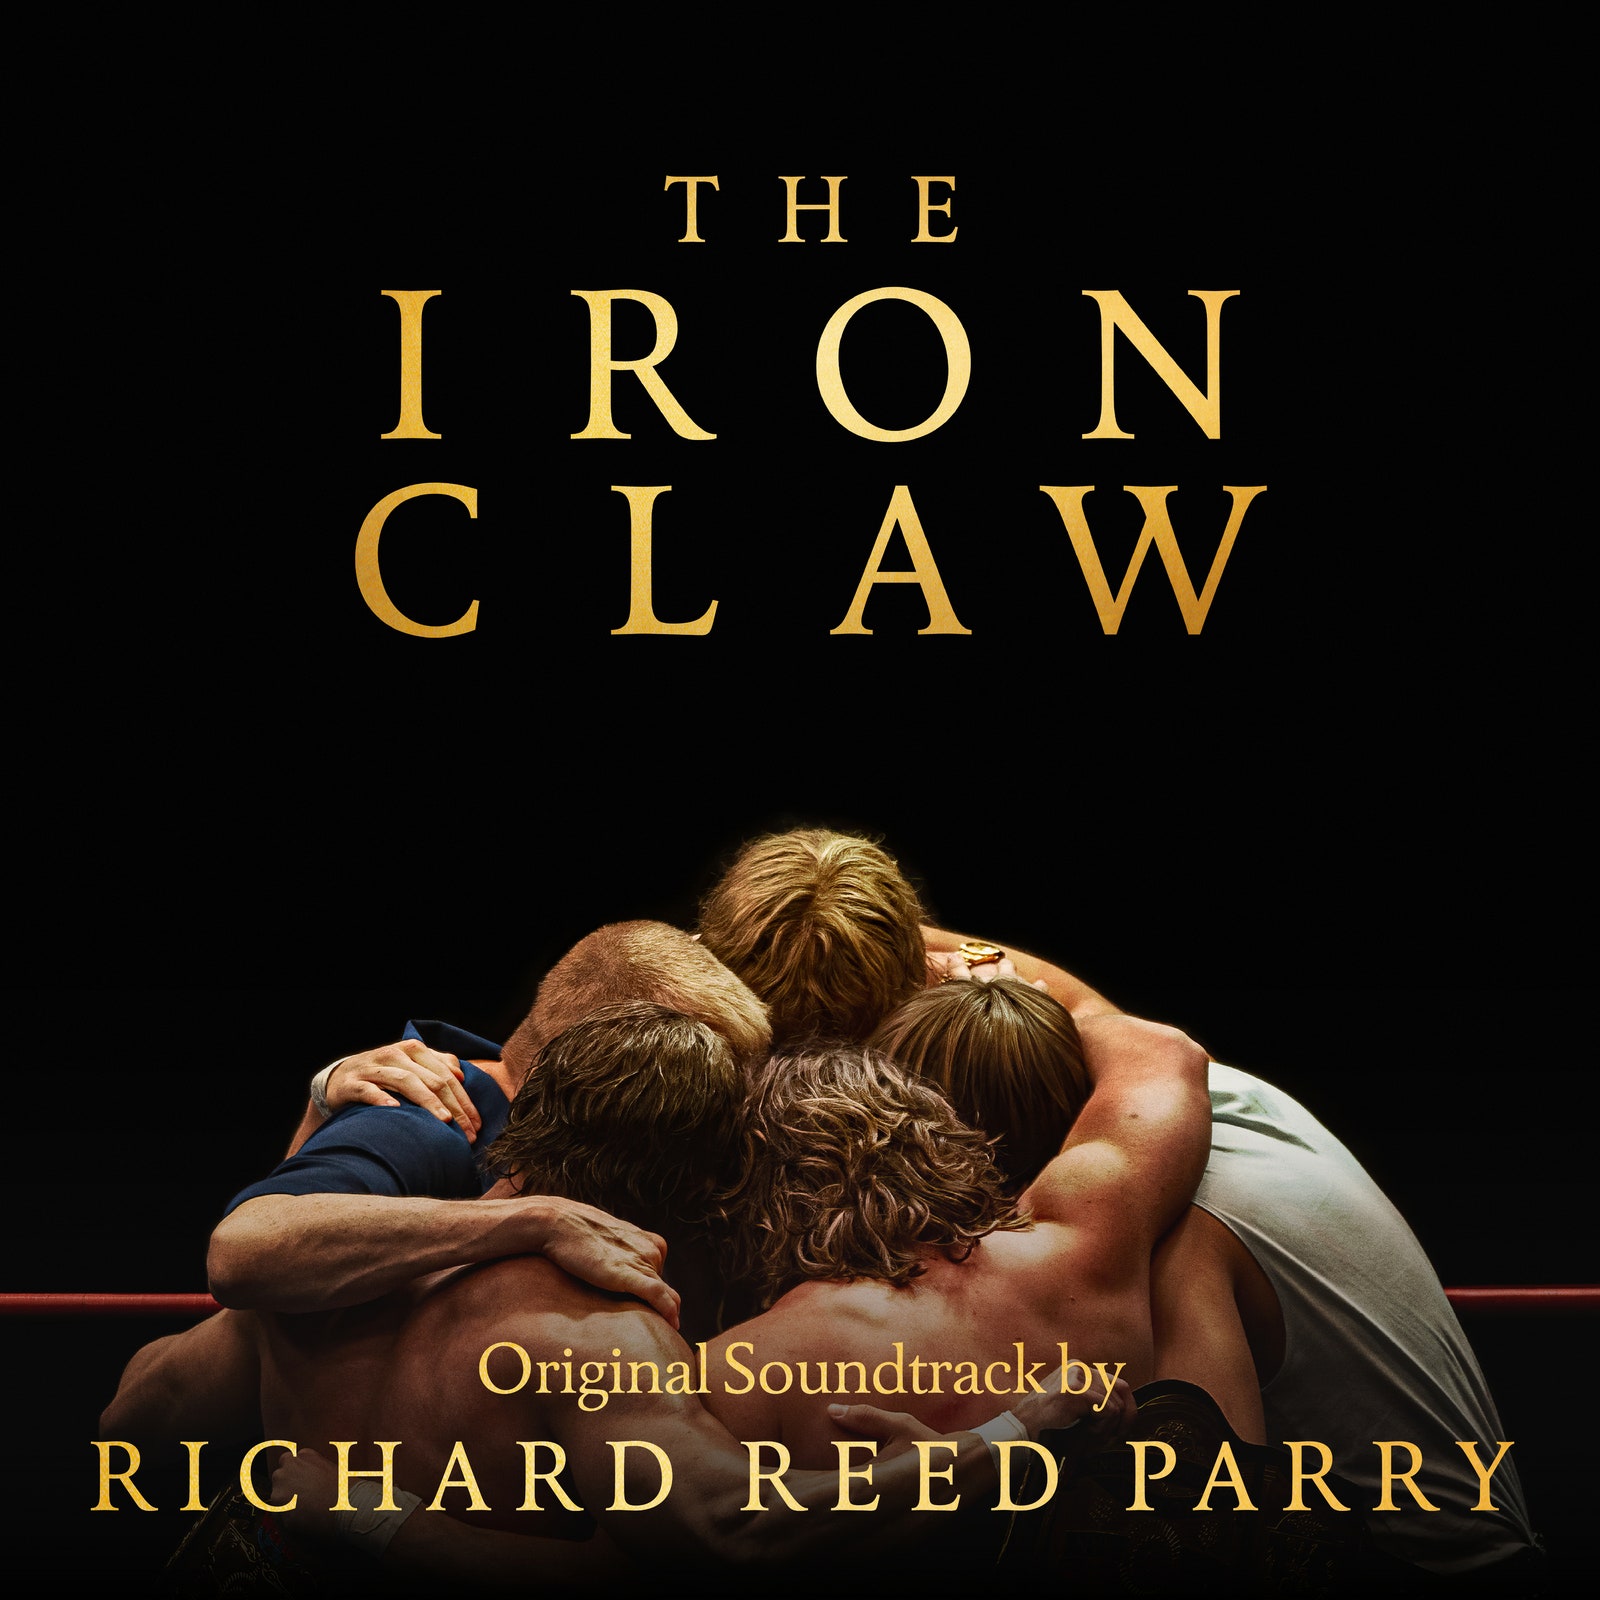 Richard Reed Parry The Iron Claw